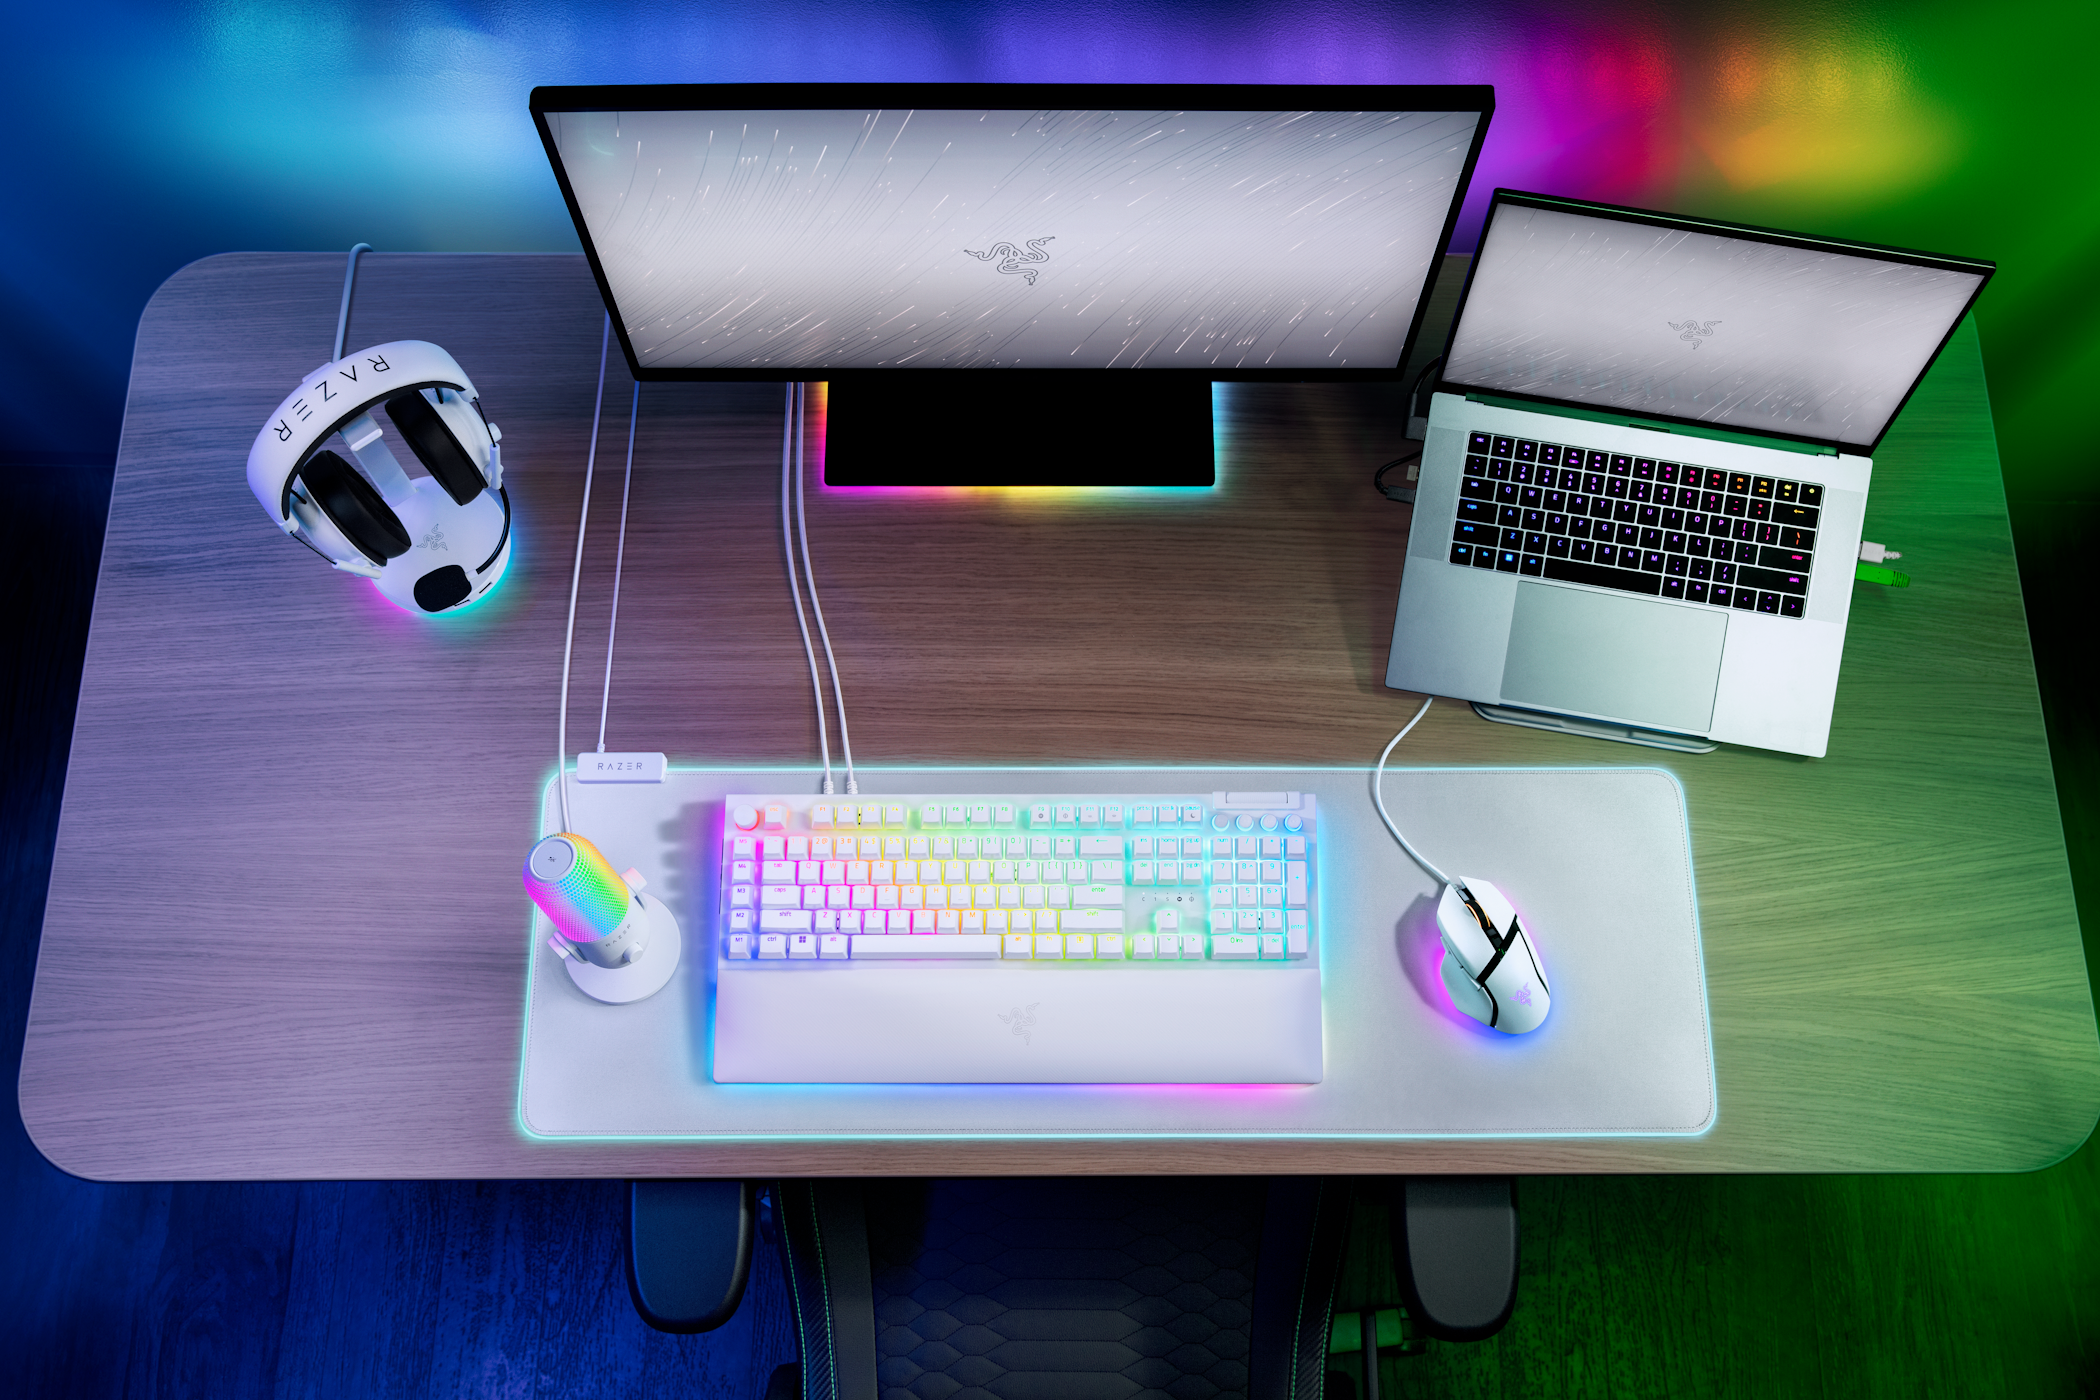 Razer's new white accessory range combines powerful hardware with a sleek, clean look